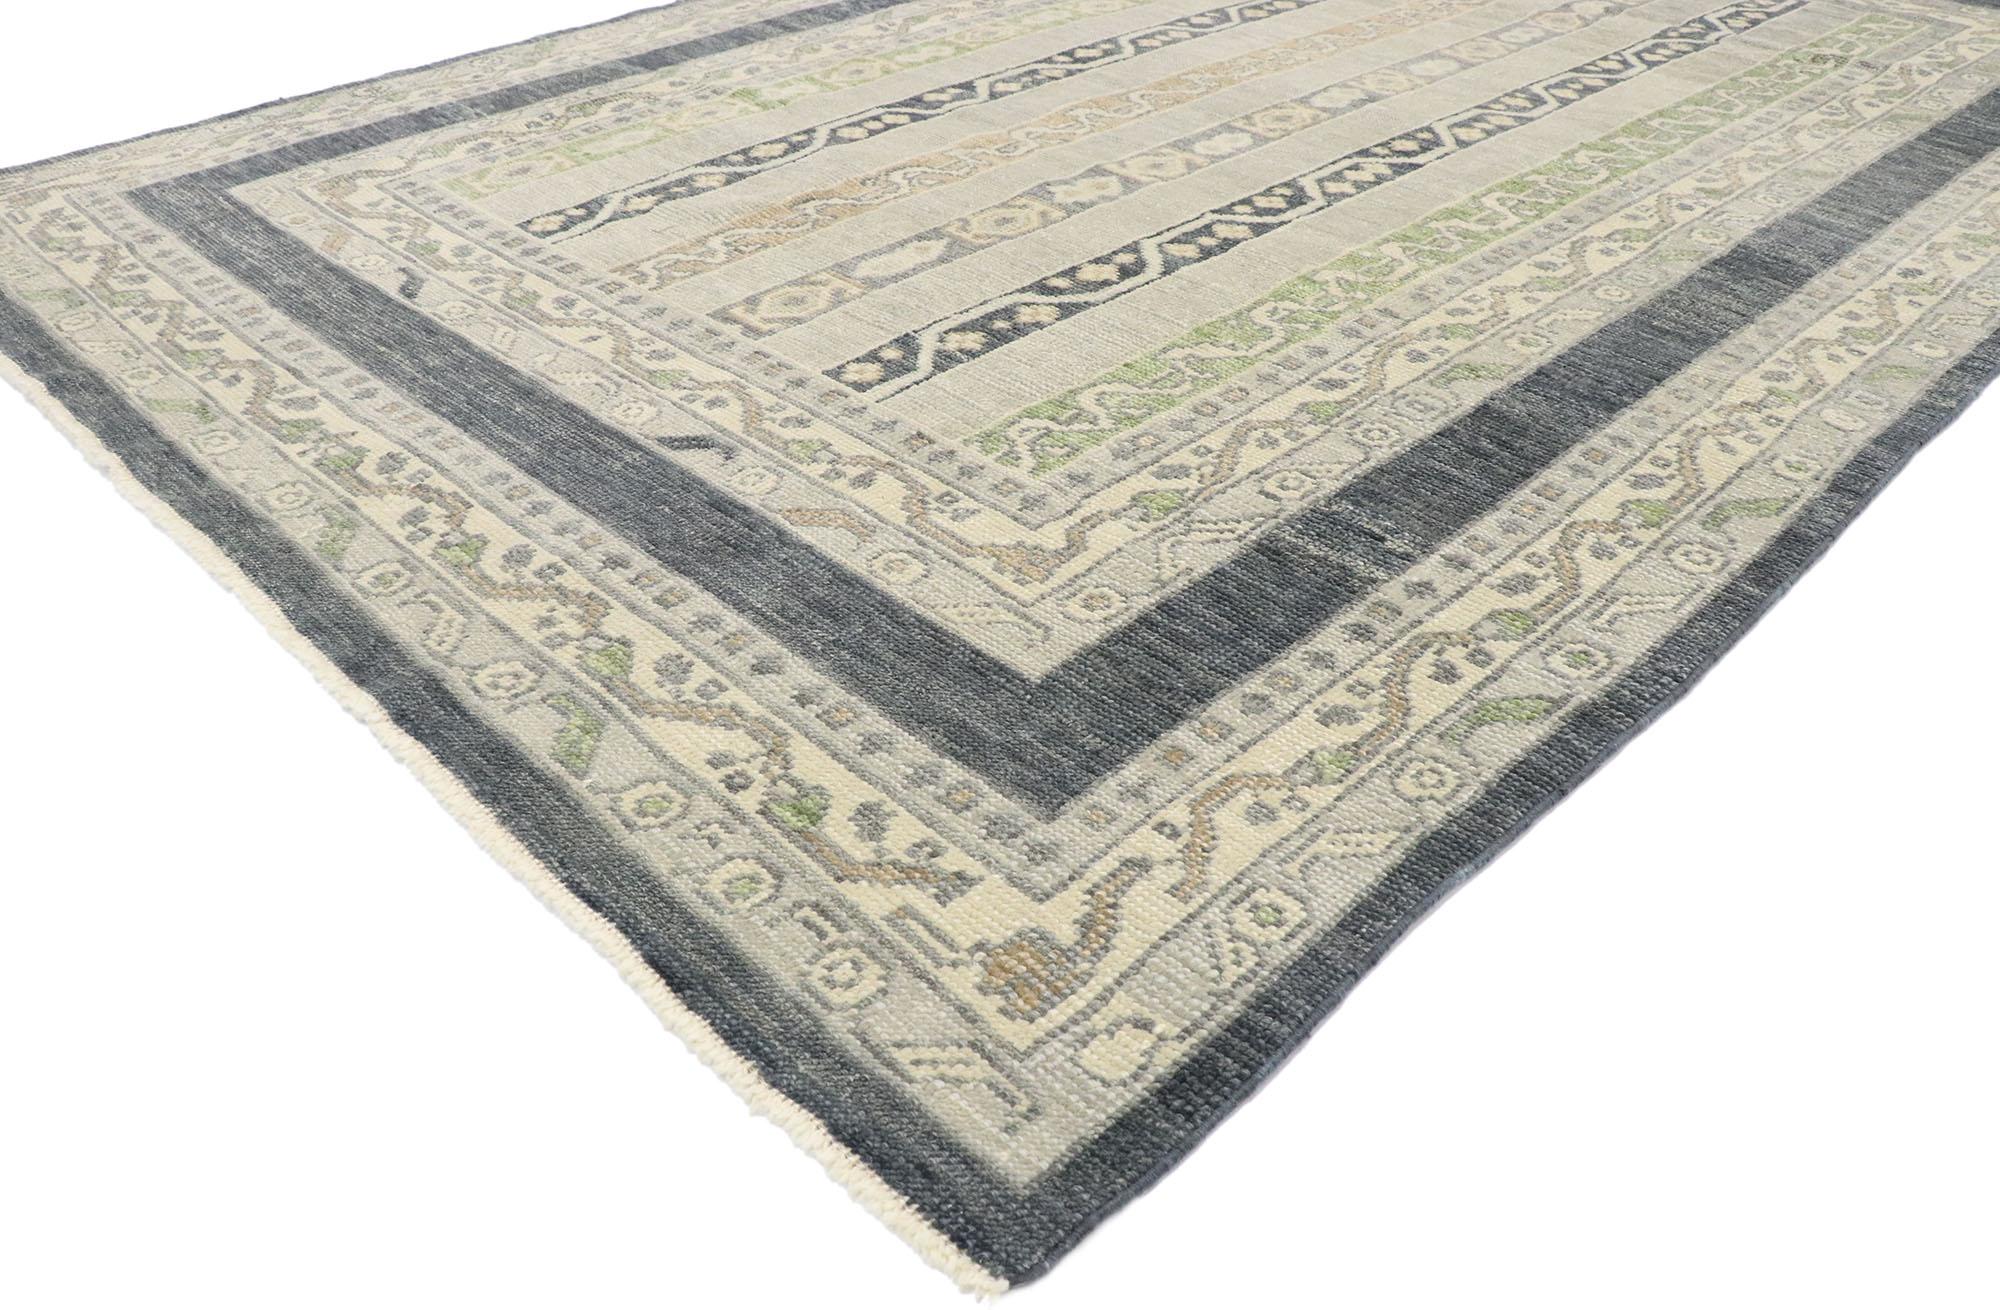 53426 New contemporary Turkish Oushak rug with Transitional modern style. Blending elements from the modern world with a cool and tranquil color palette, this hand knotted wool contemporary Turkish Oushak rug is poised to impress. The geometric